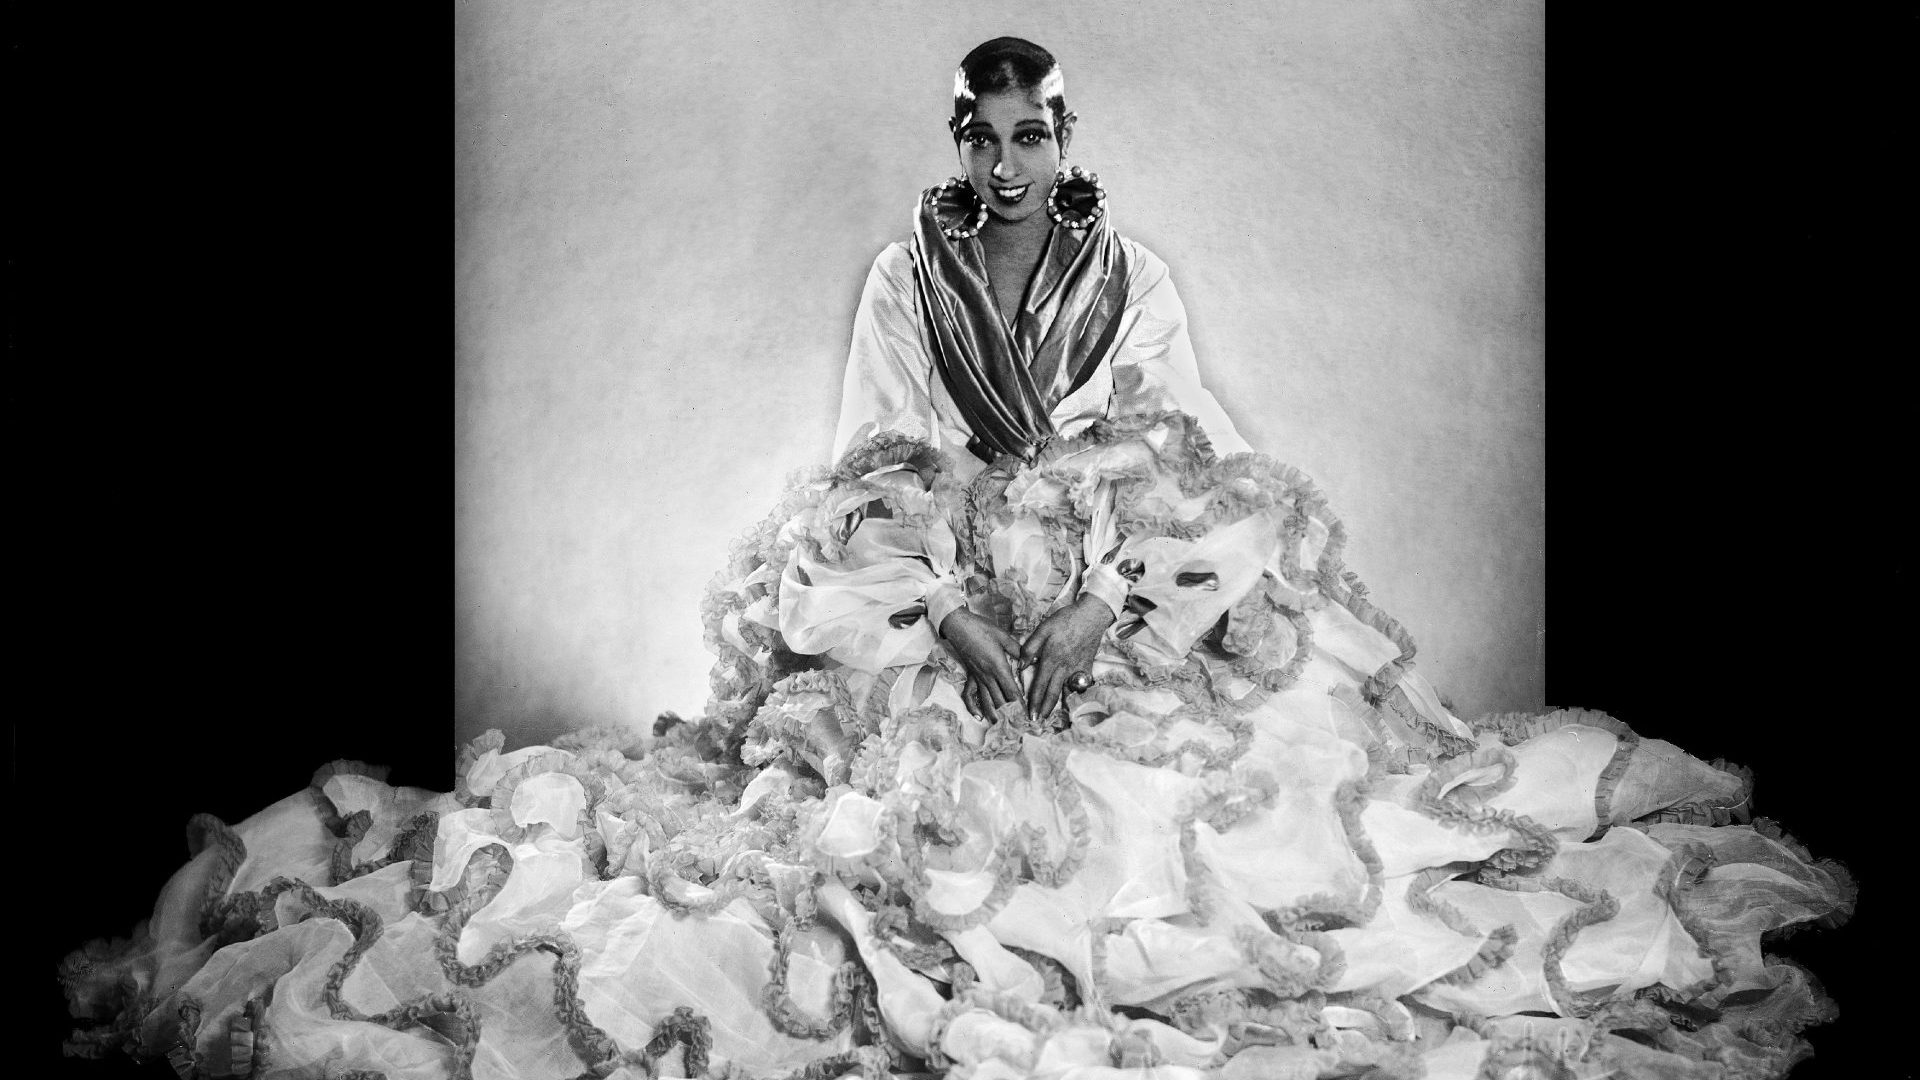 Josephine Baker: Icon in Motion, at Berlin’s Neue Nationalgalerie between January and April, celebrates the life of the dancer, singer and actress. Photo: Keystone-France/Gamma-Keystone/Getty